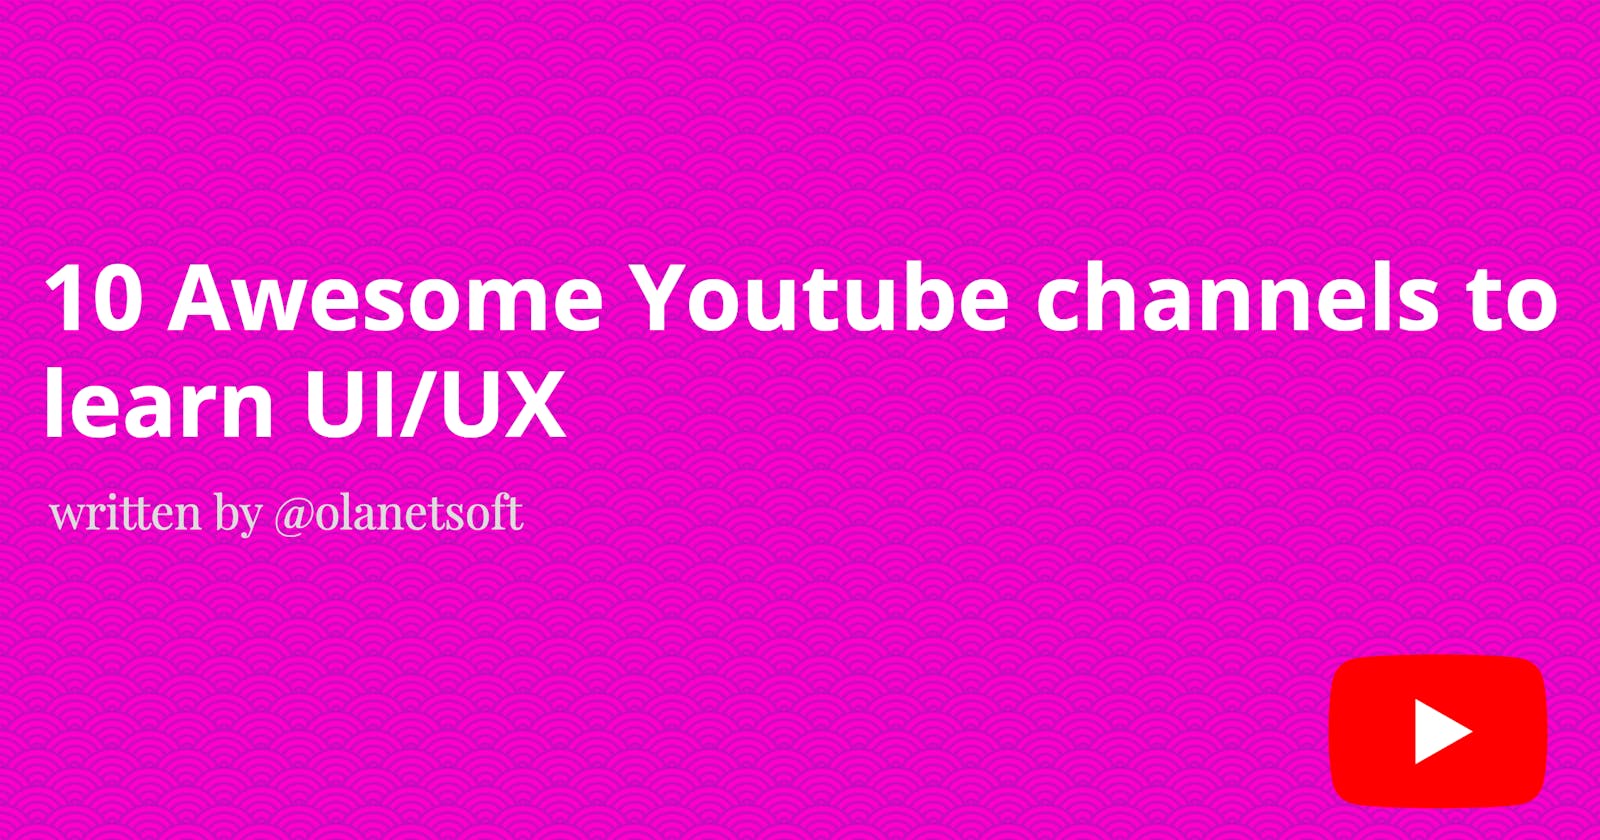 10 Awesome Youtube channels to learn UI/UX